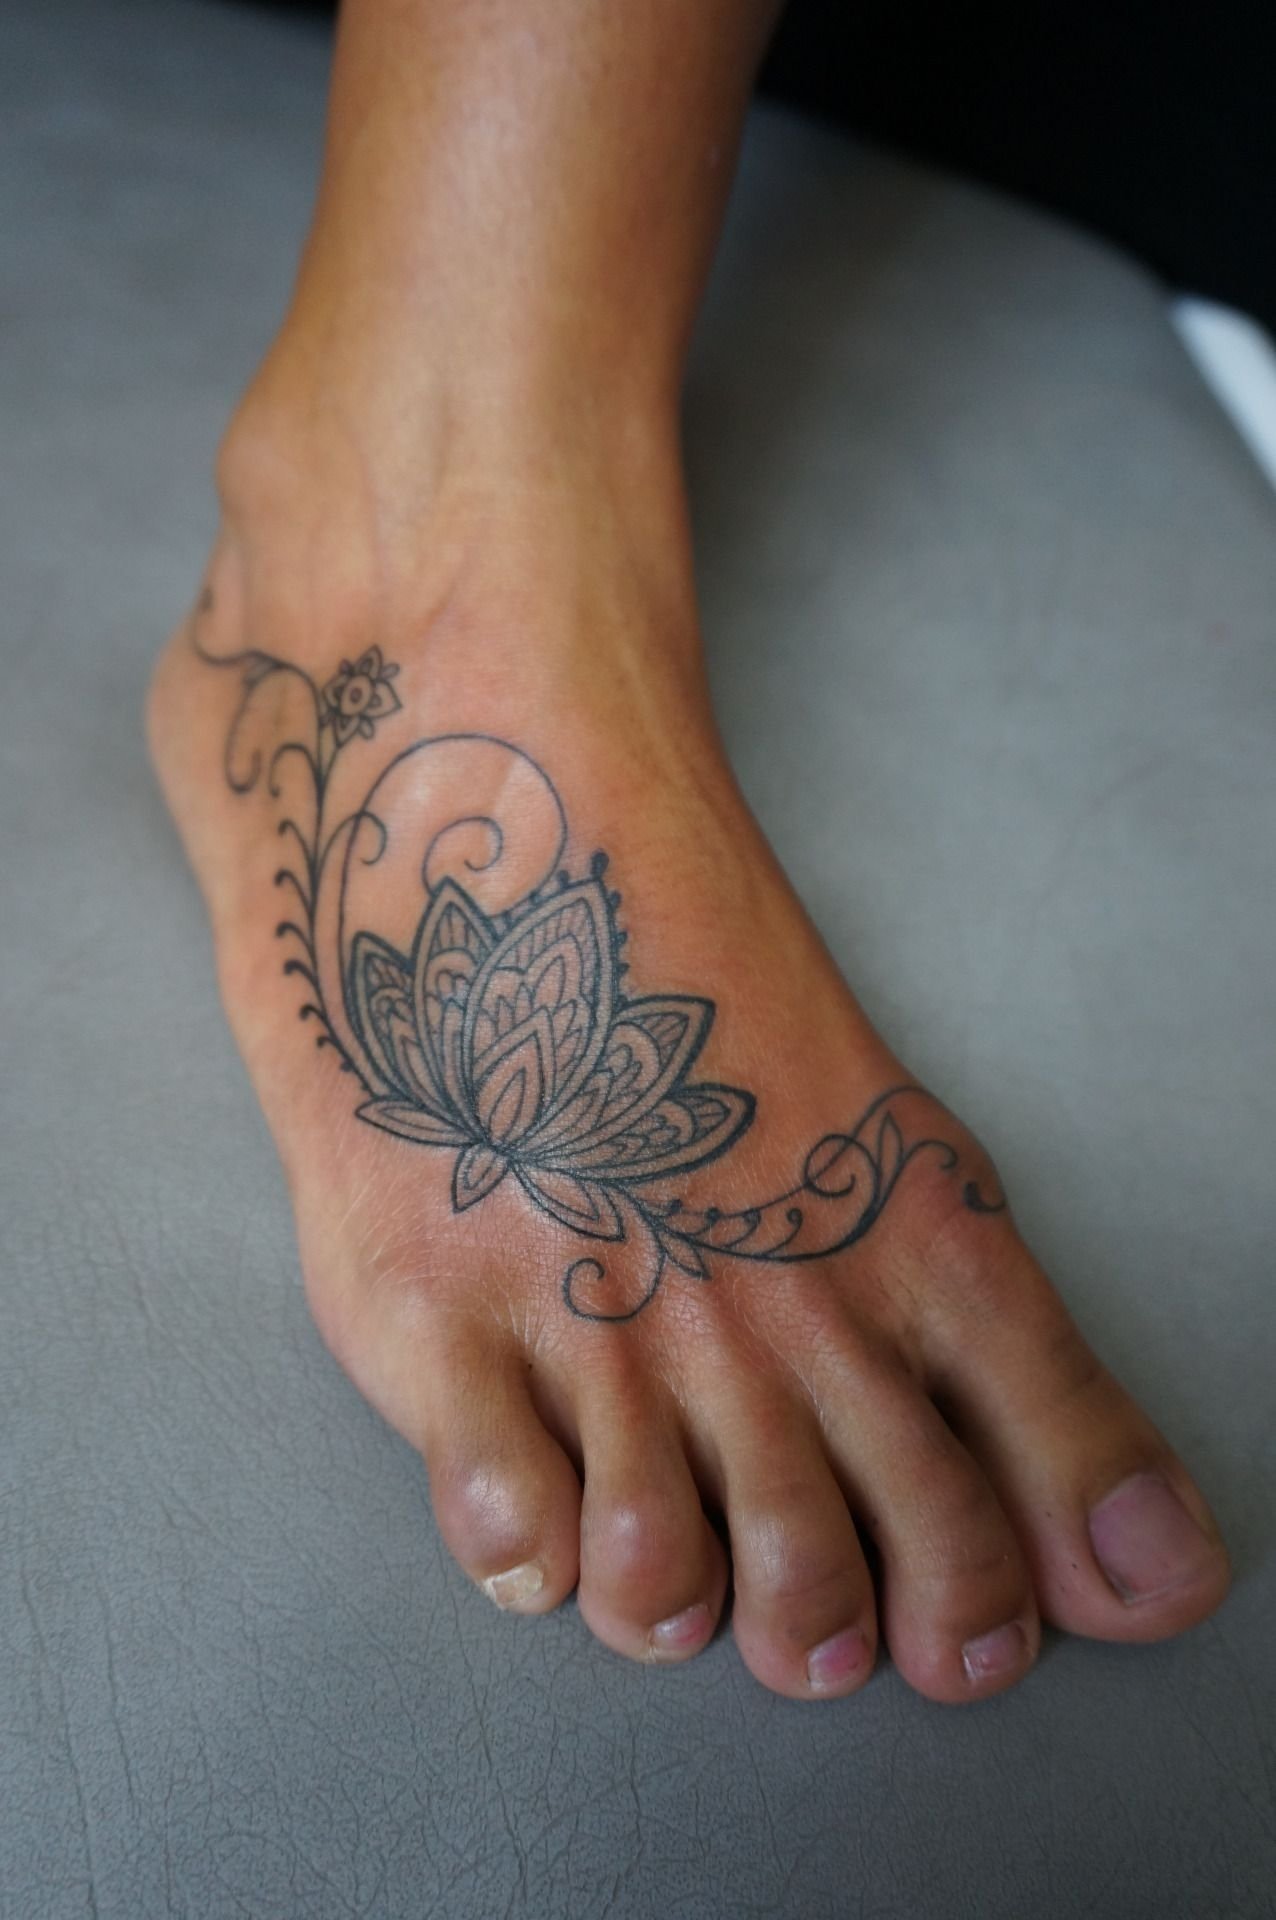 10 Perfect Tattoo Ideas For The Foot this tattoo reminded me of the time i used to do henna paste at 2022